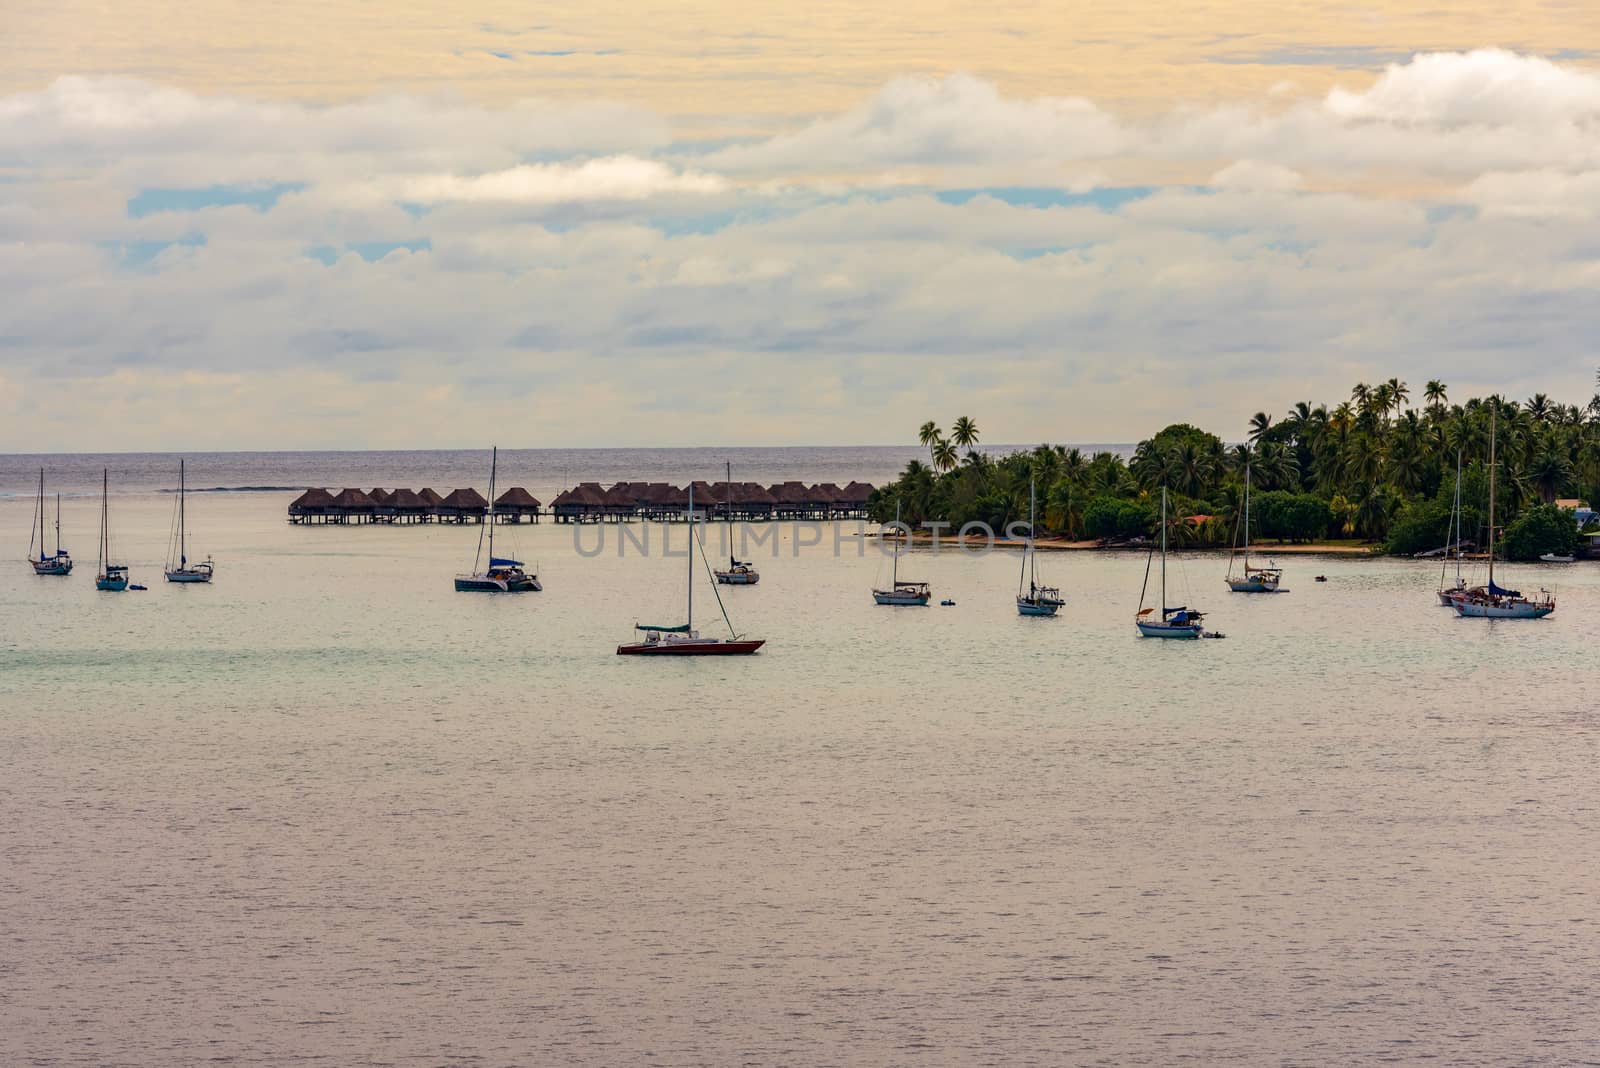 Boats are anchored off the island of Moorea, part of French Polynesia, early in the morning.